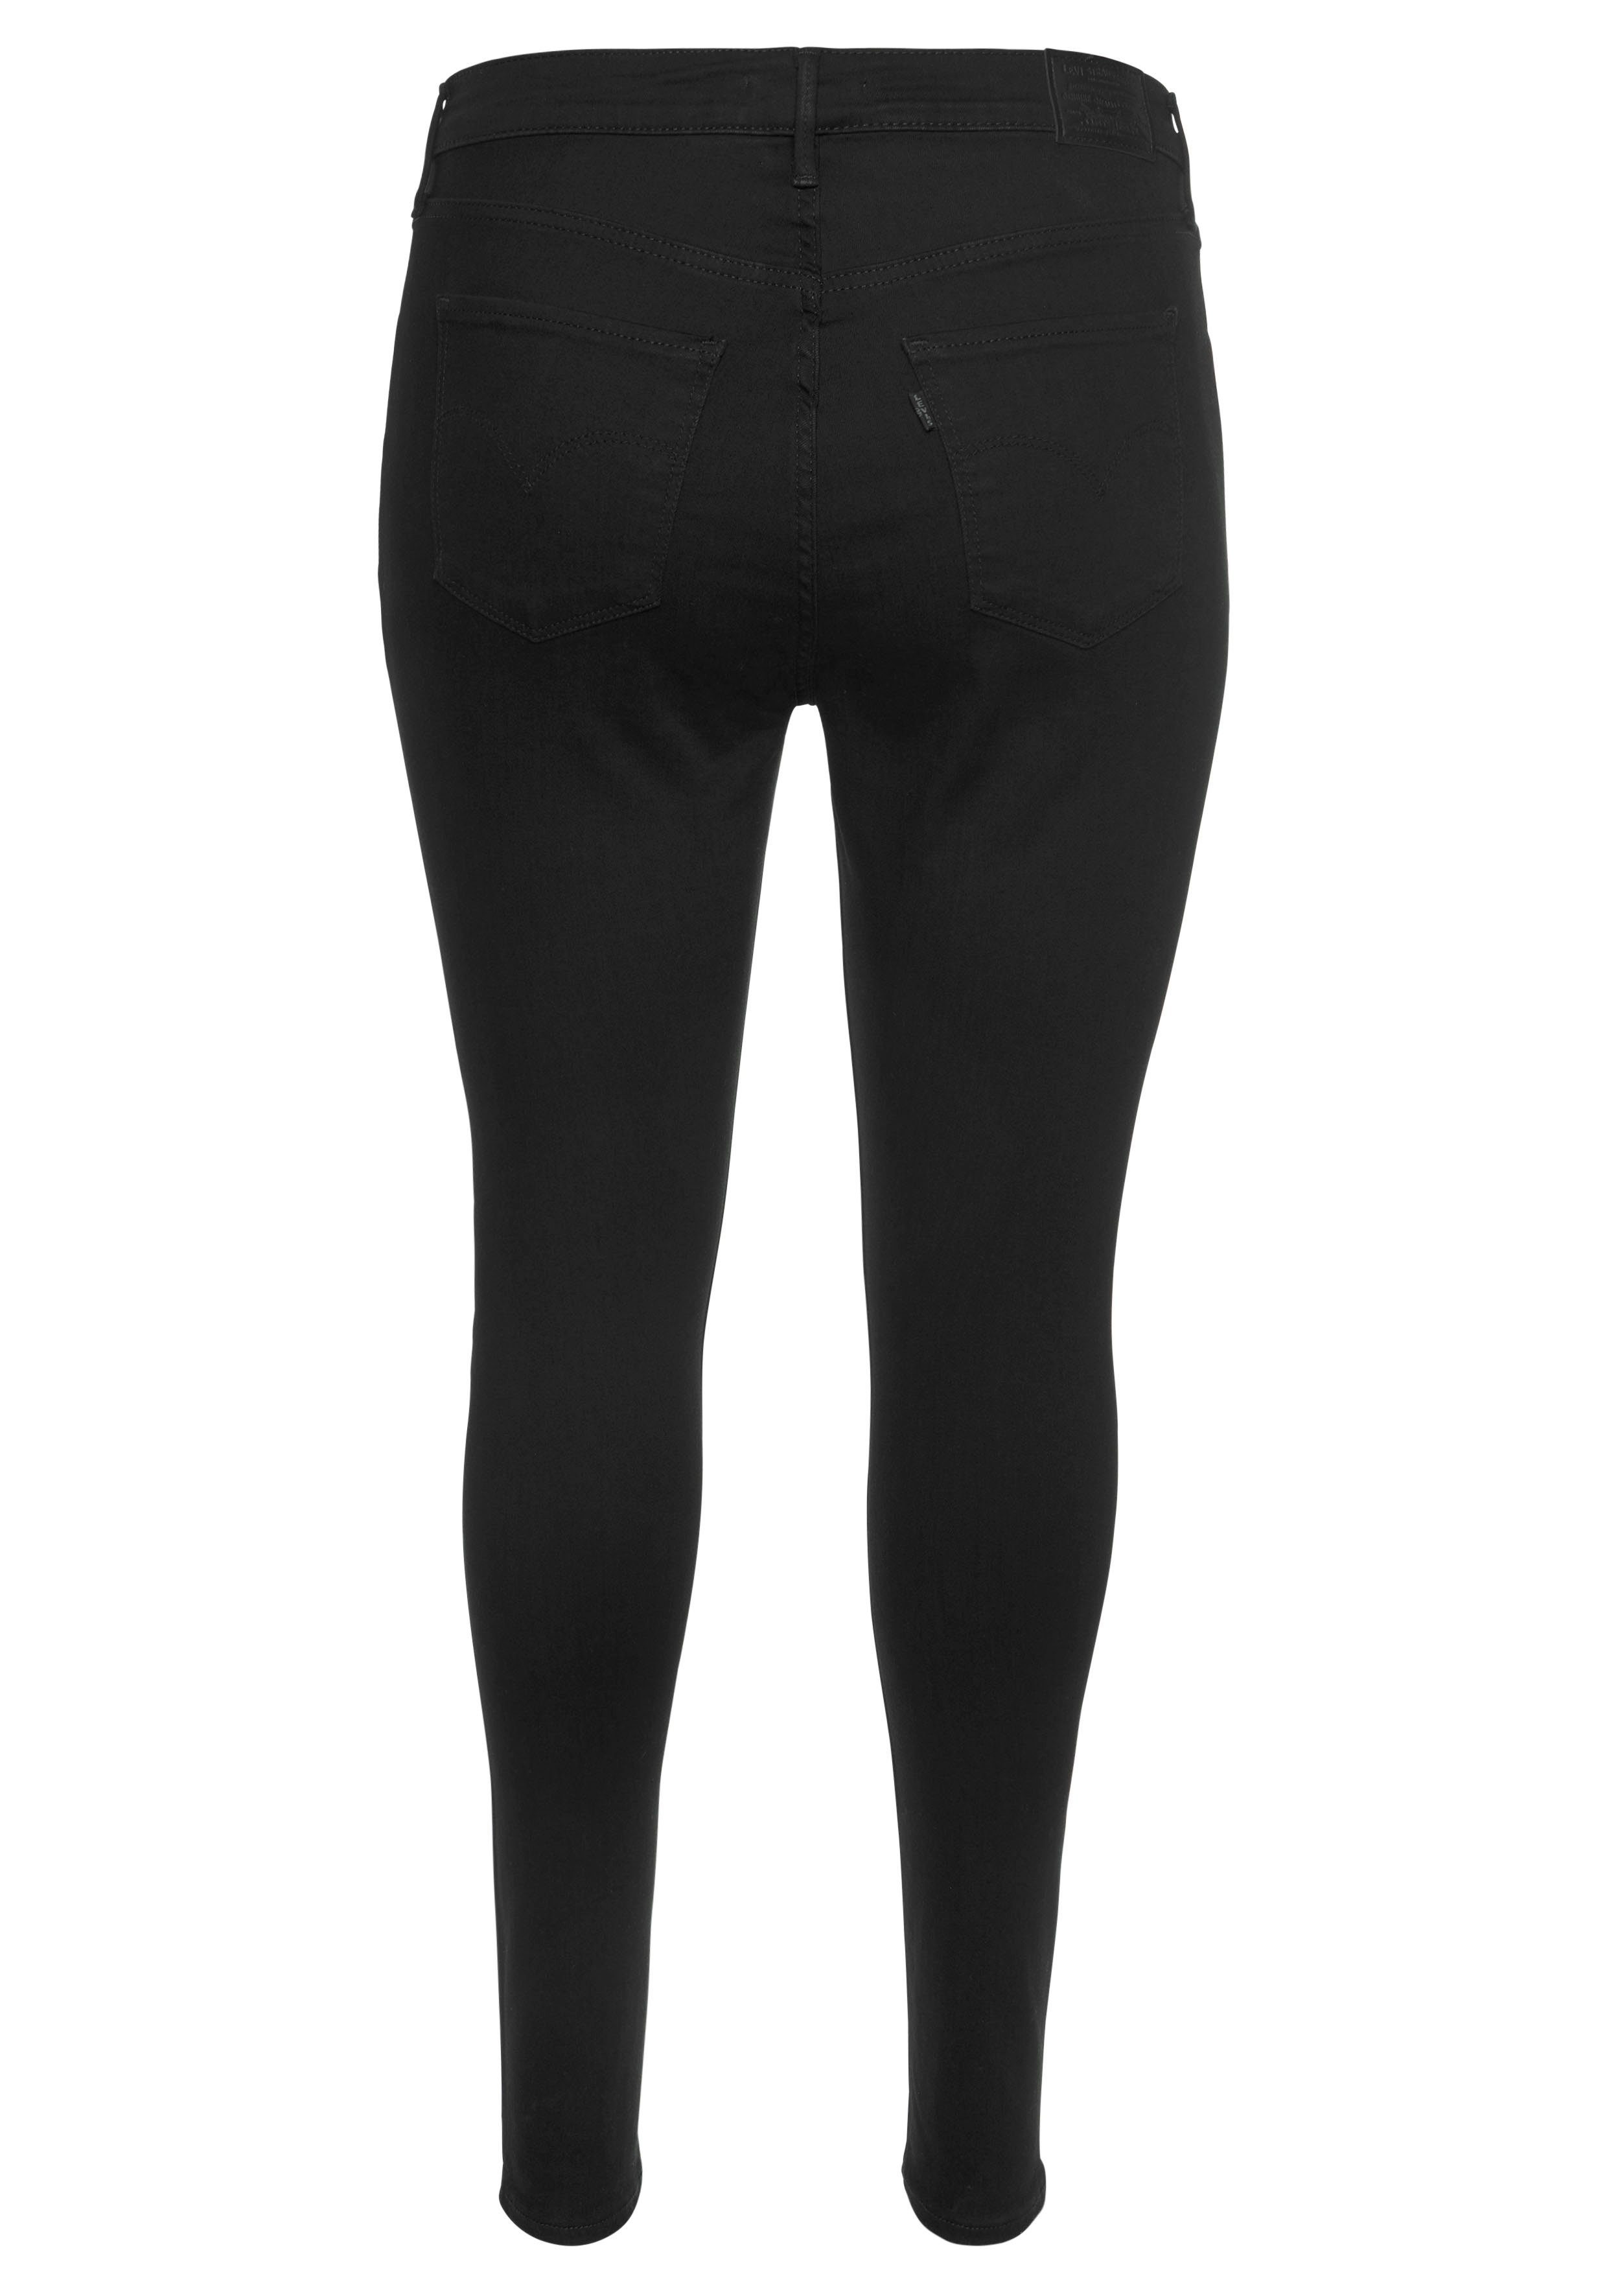 Plus hoher black mit Levi's® Skinny-fit-Jeans 720 Leibhöhe High-Rise